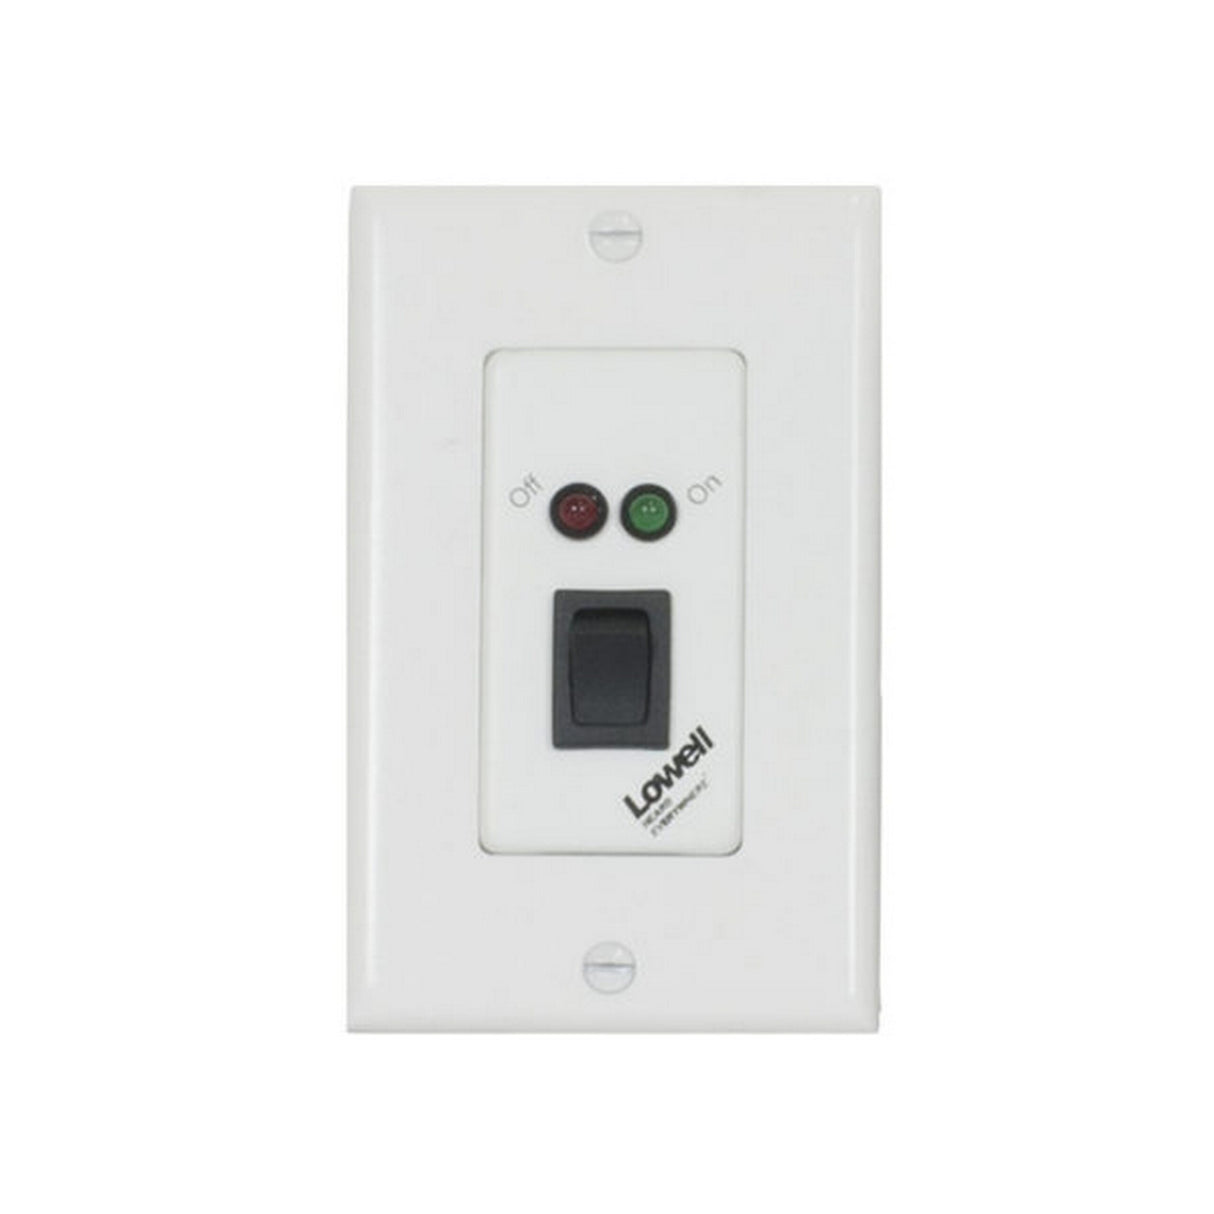 Lowell RPSW2-MP-RJ Momentary SPST Low-Voltage Switch with RJ45 Connector